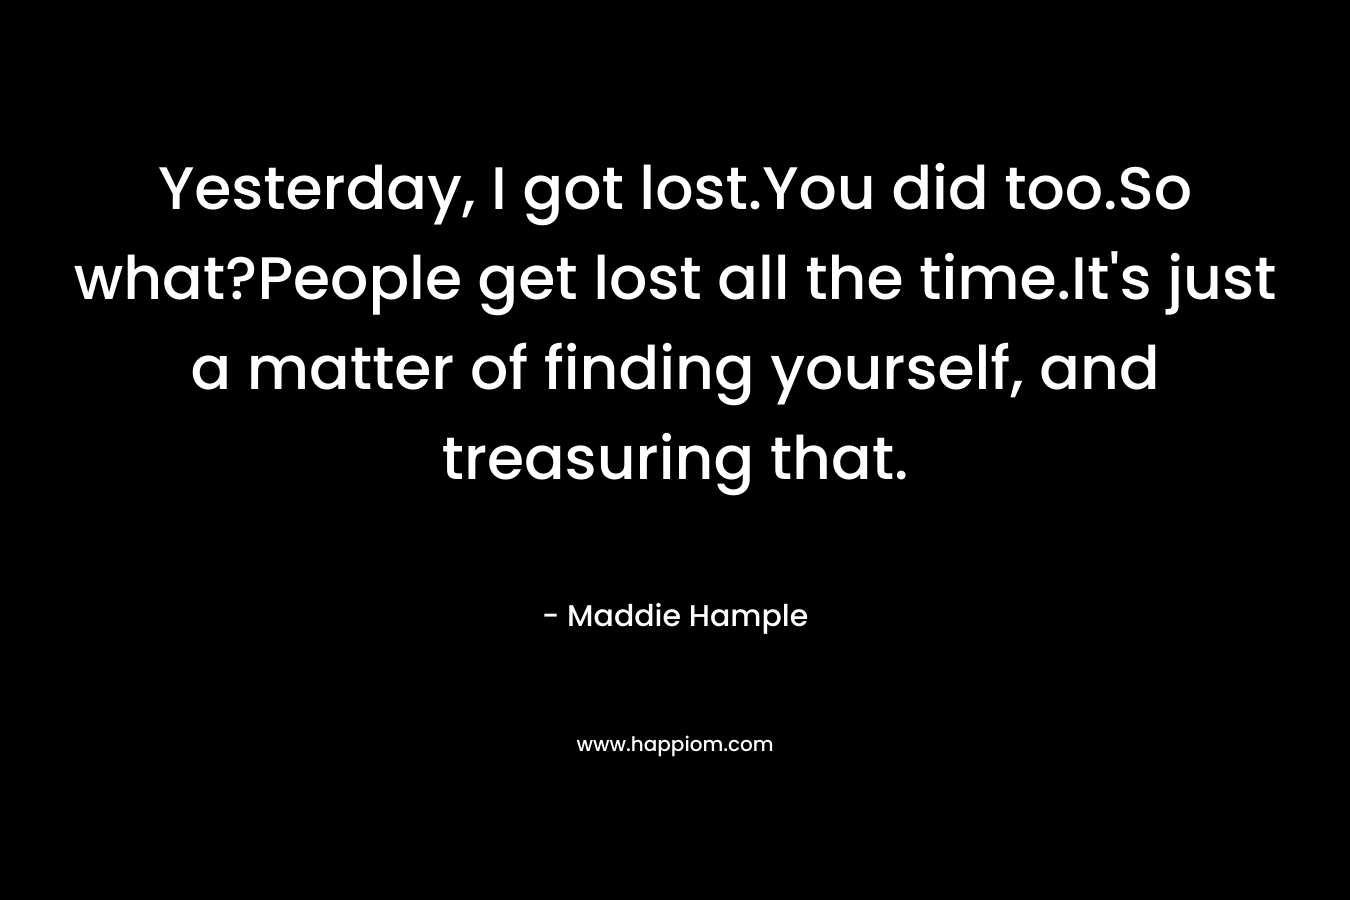 Yesterday, I got lost.You did too.So what?People get lost all the time.It’s just a matter of finding yourself, and treasuring that. – Maddie Hample